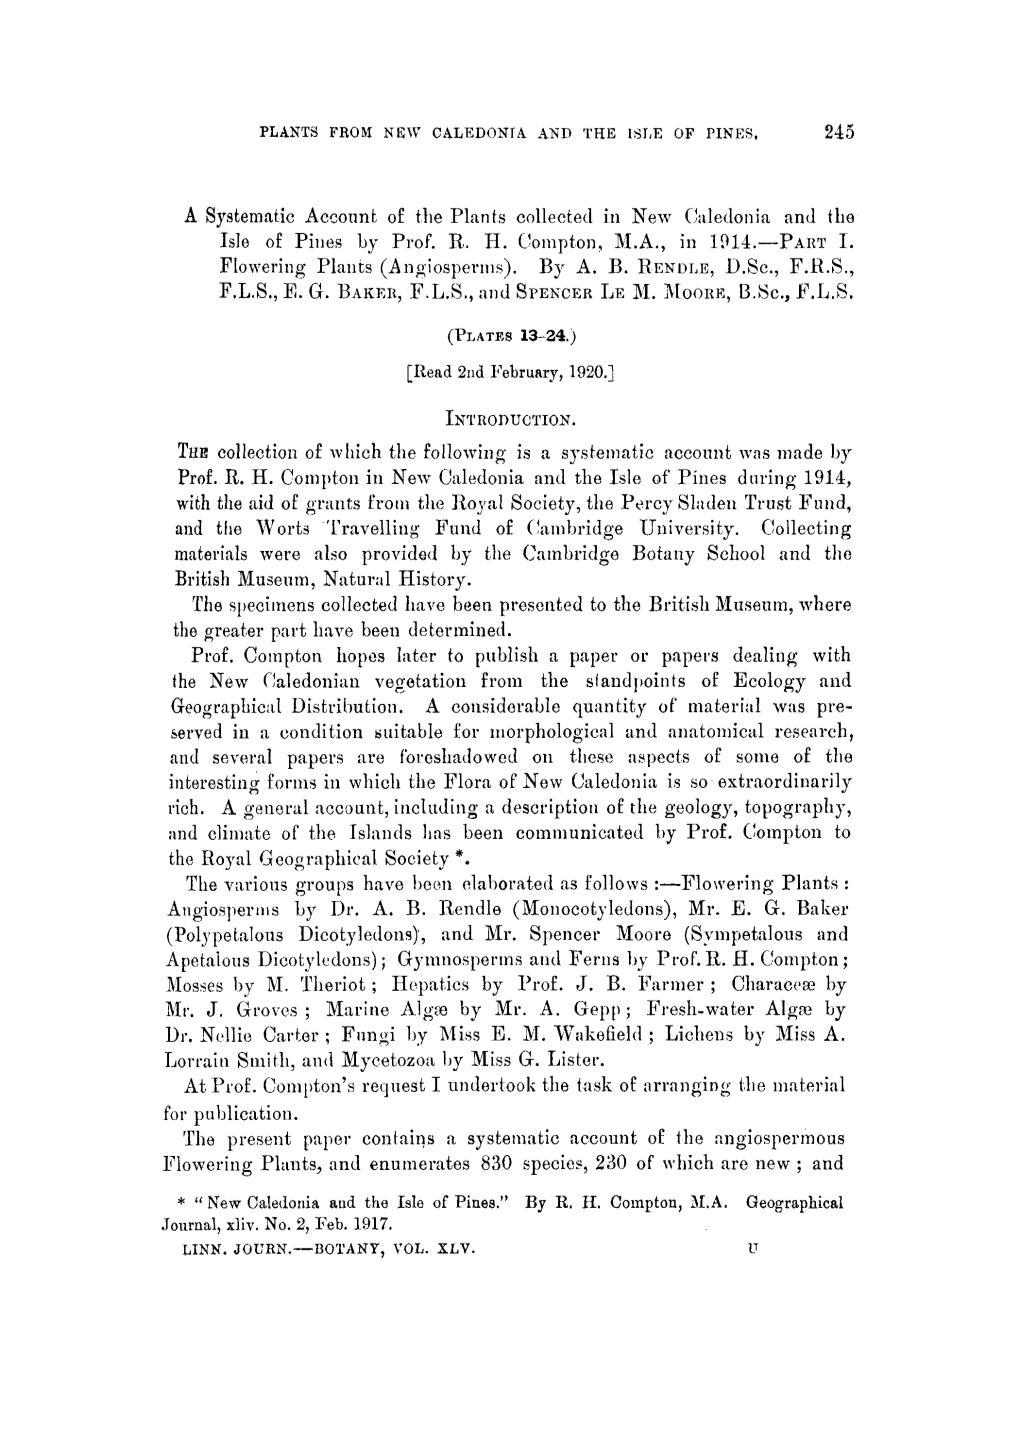 A Systematic Account of the Plants Collected in New Caledonia and the Isle of Pines by Prof. R. H. Compton, M.A., in 1914.Part I